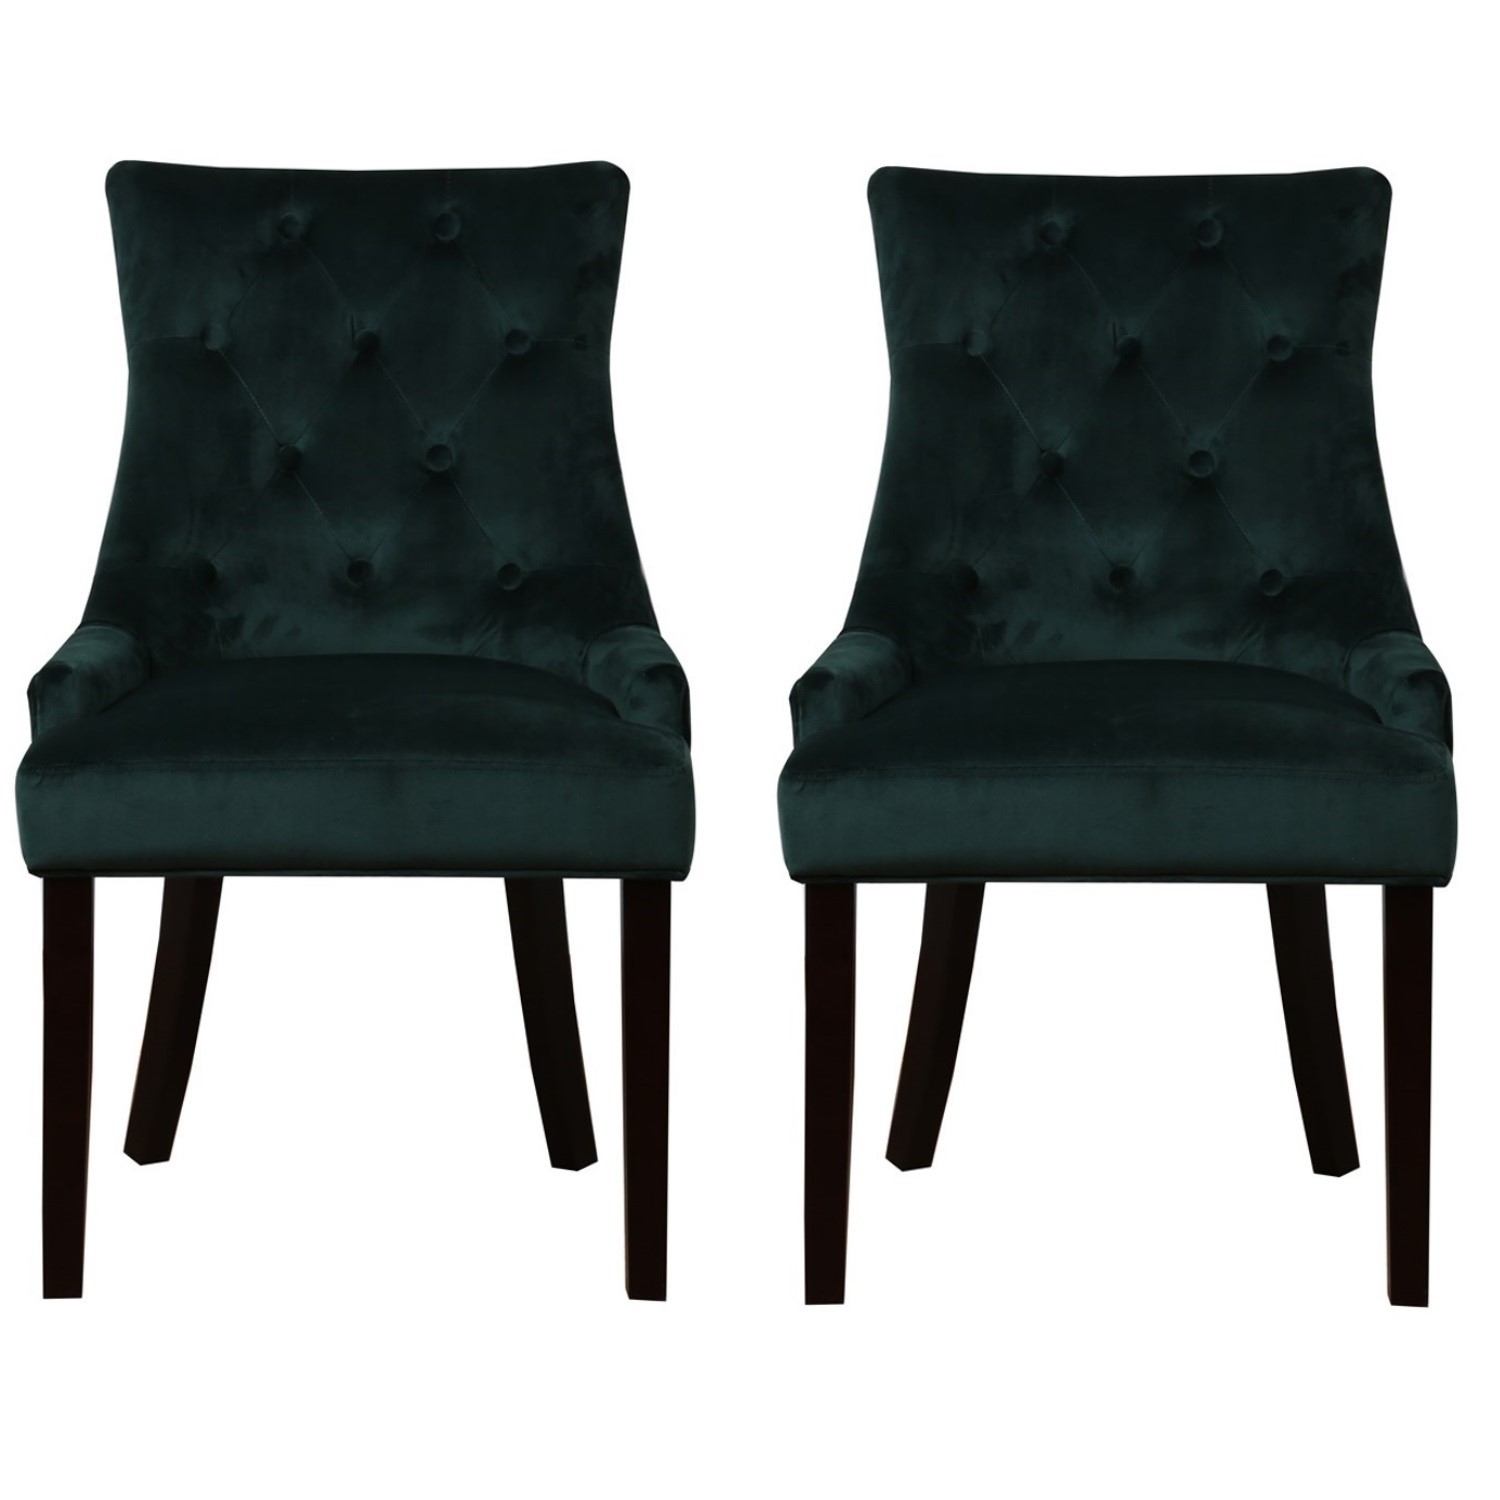 pair of buttoned green velvet dining chairs with black legs  kaylee